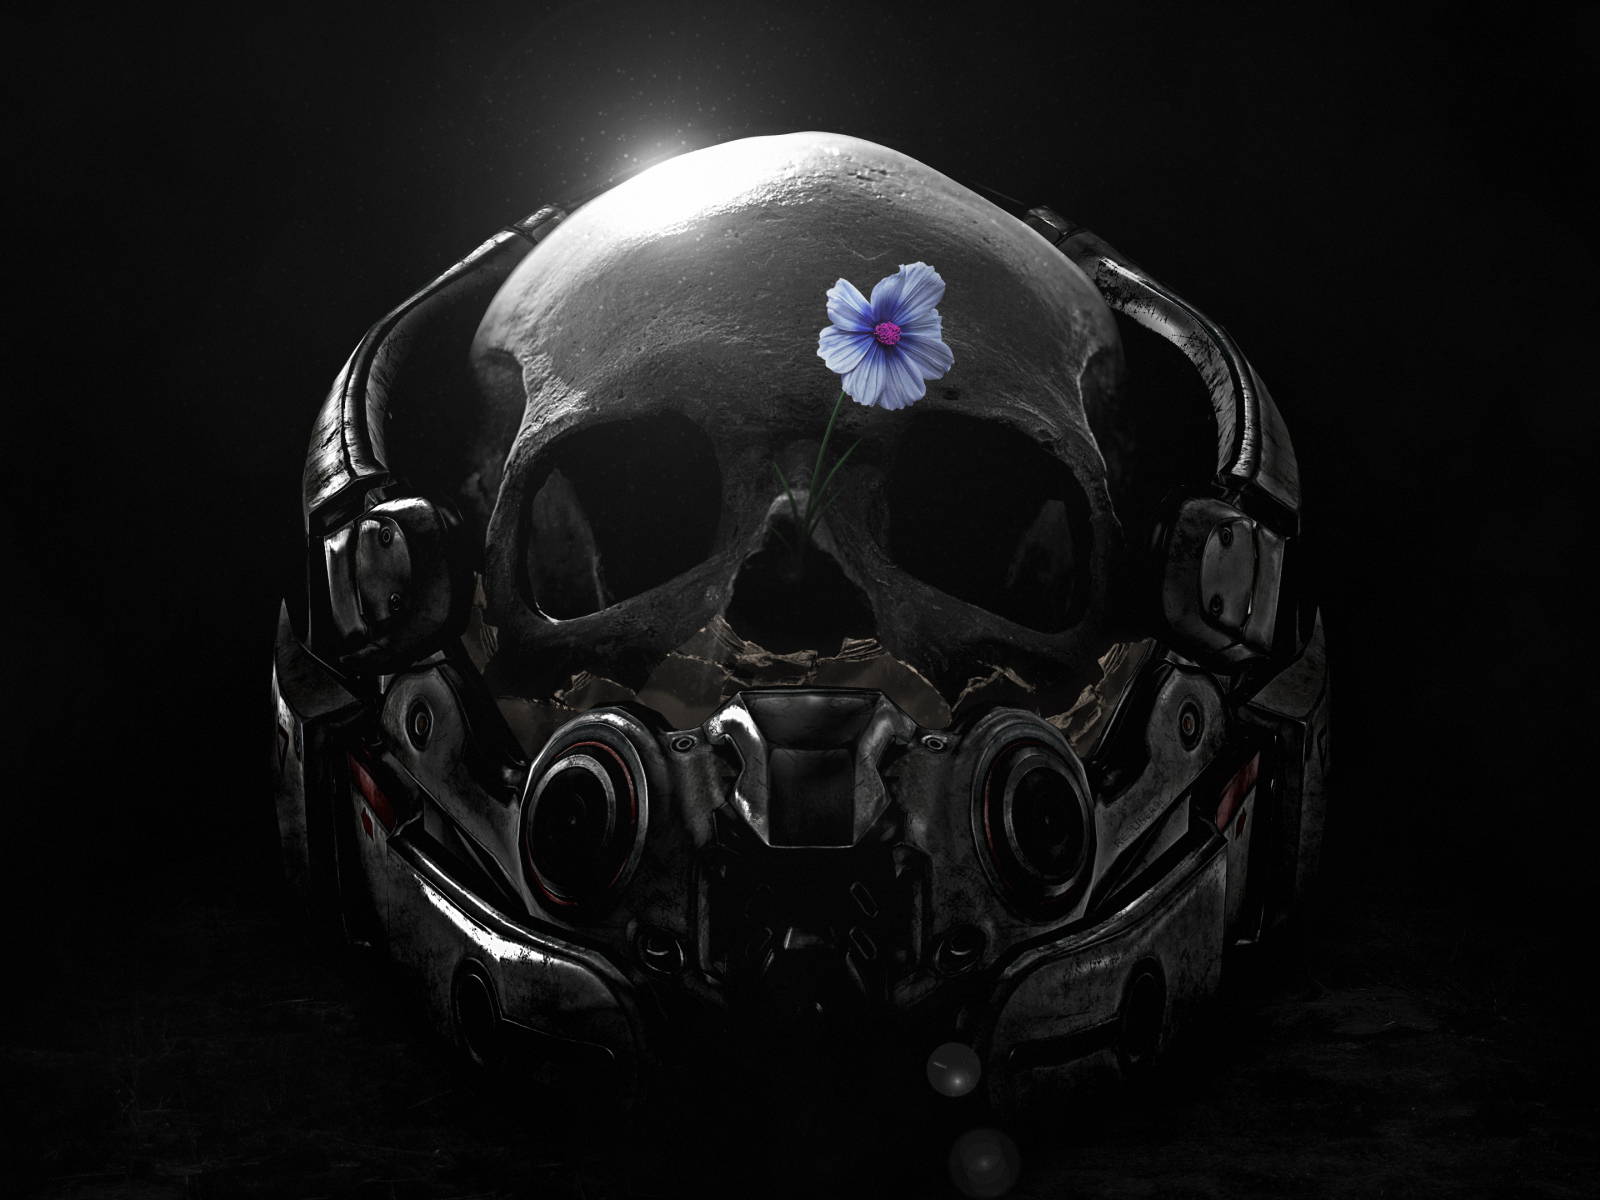 Skull in a helmet with a blue flower, a computer game Mass Effect. Andromeda